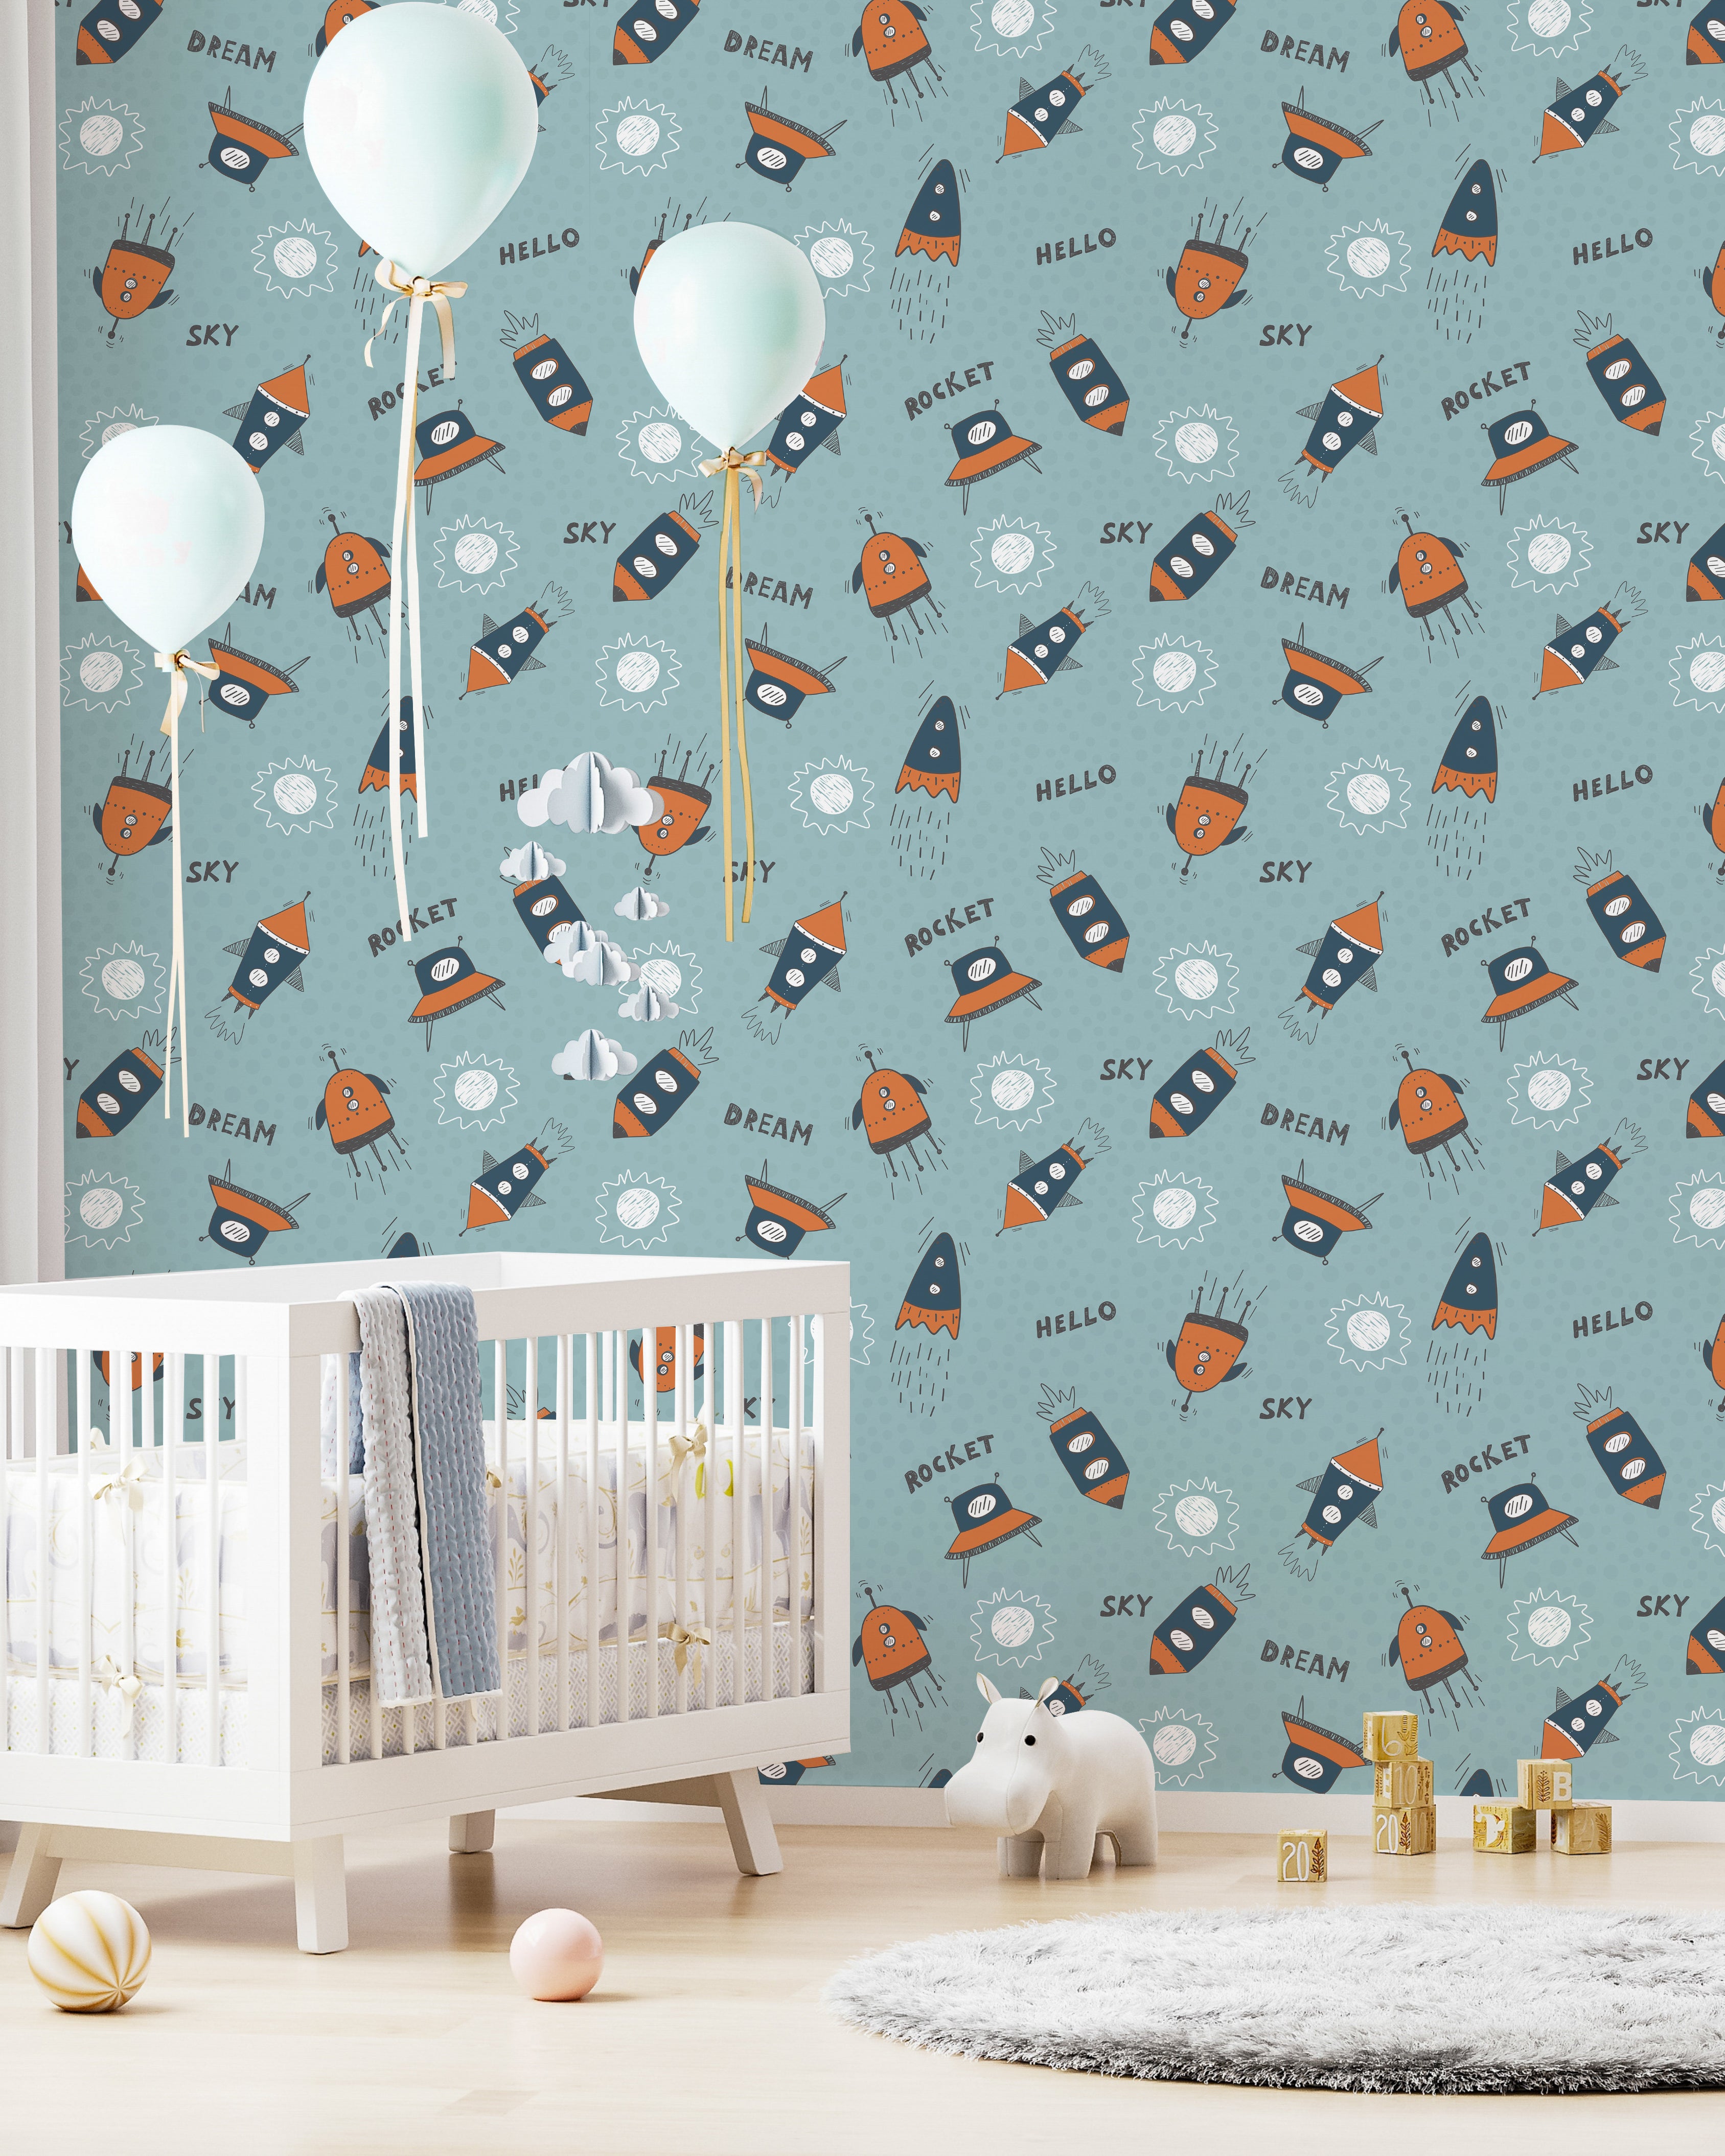 Bright and cheerful nursery featuring walls adorned with 'Hello Sky Dream' wallpaper, sky-themed decor, and a playful atmosphere